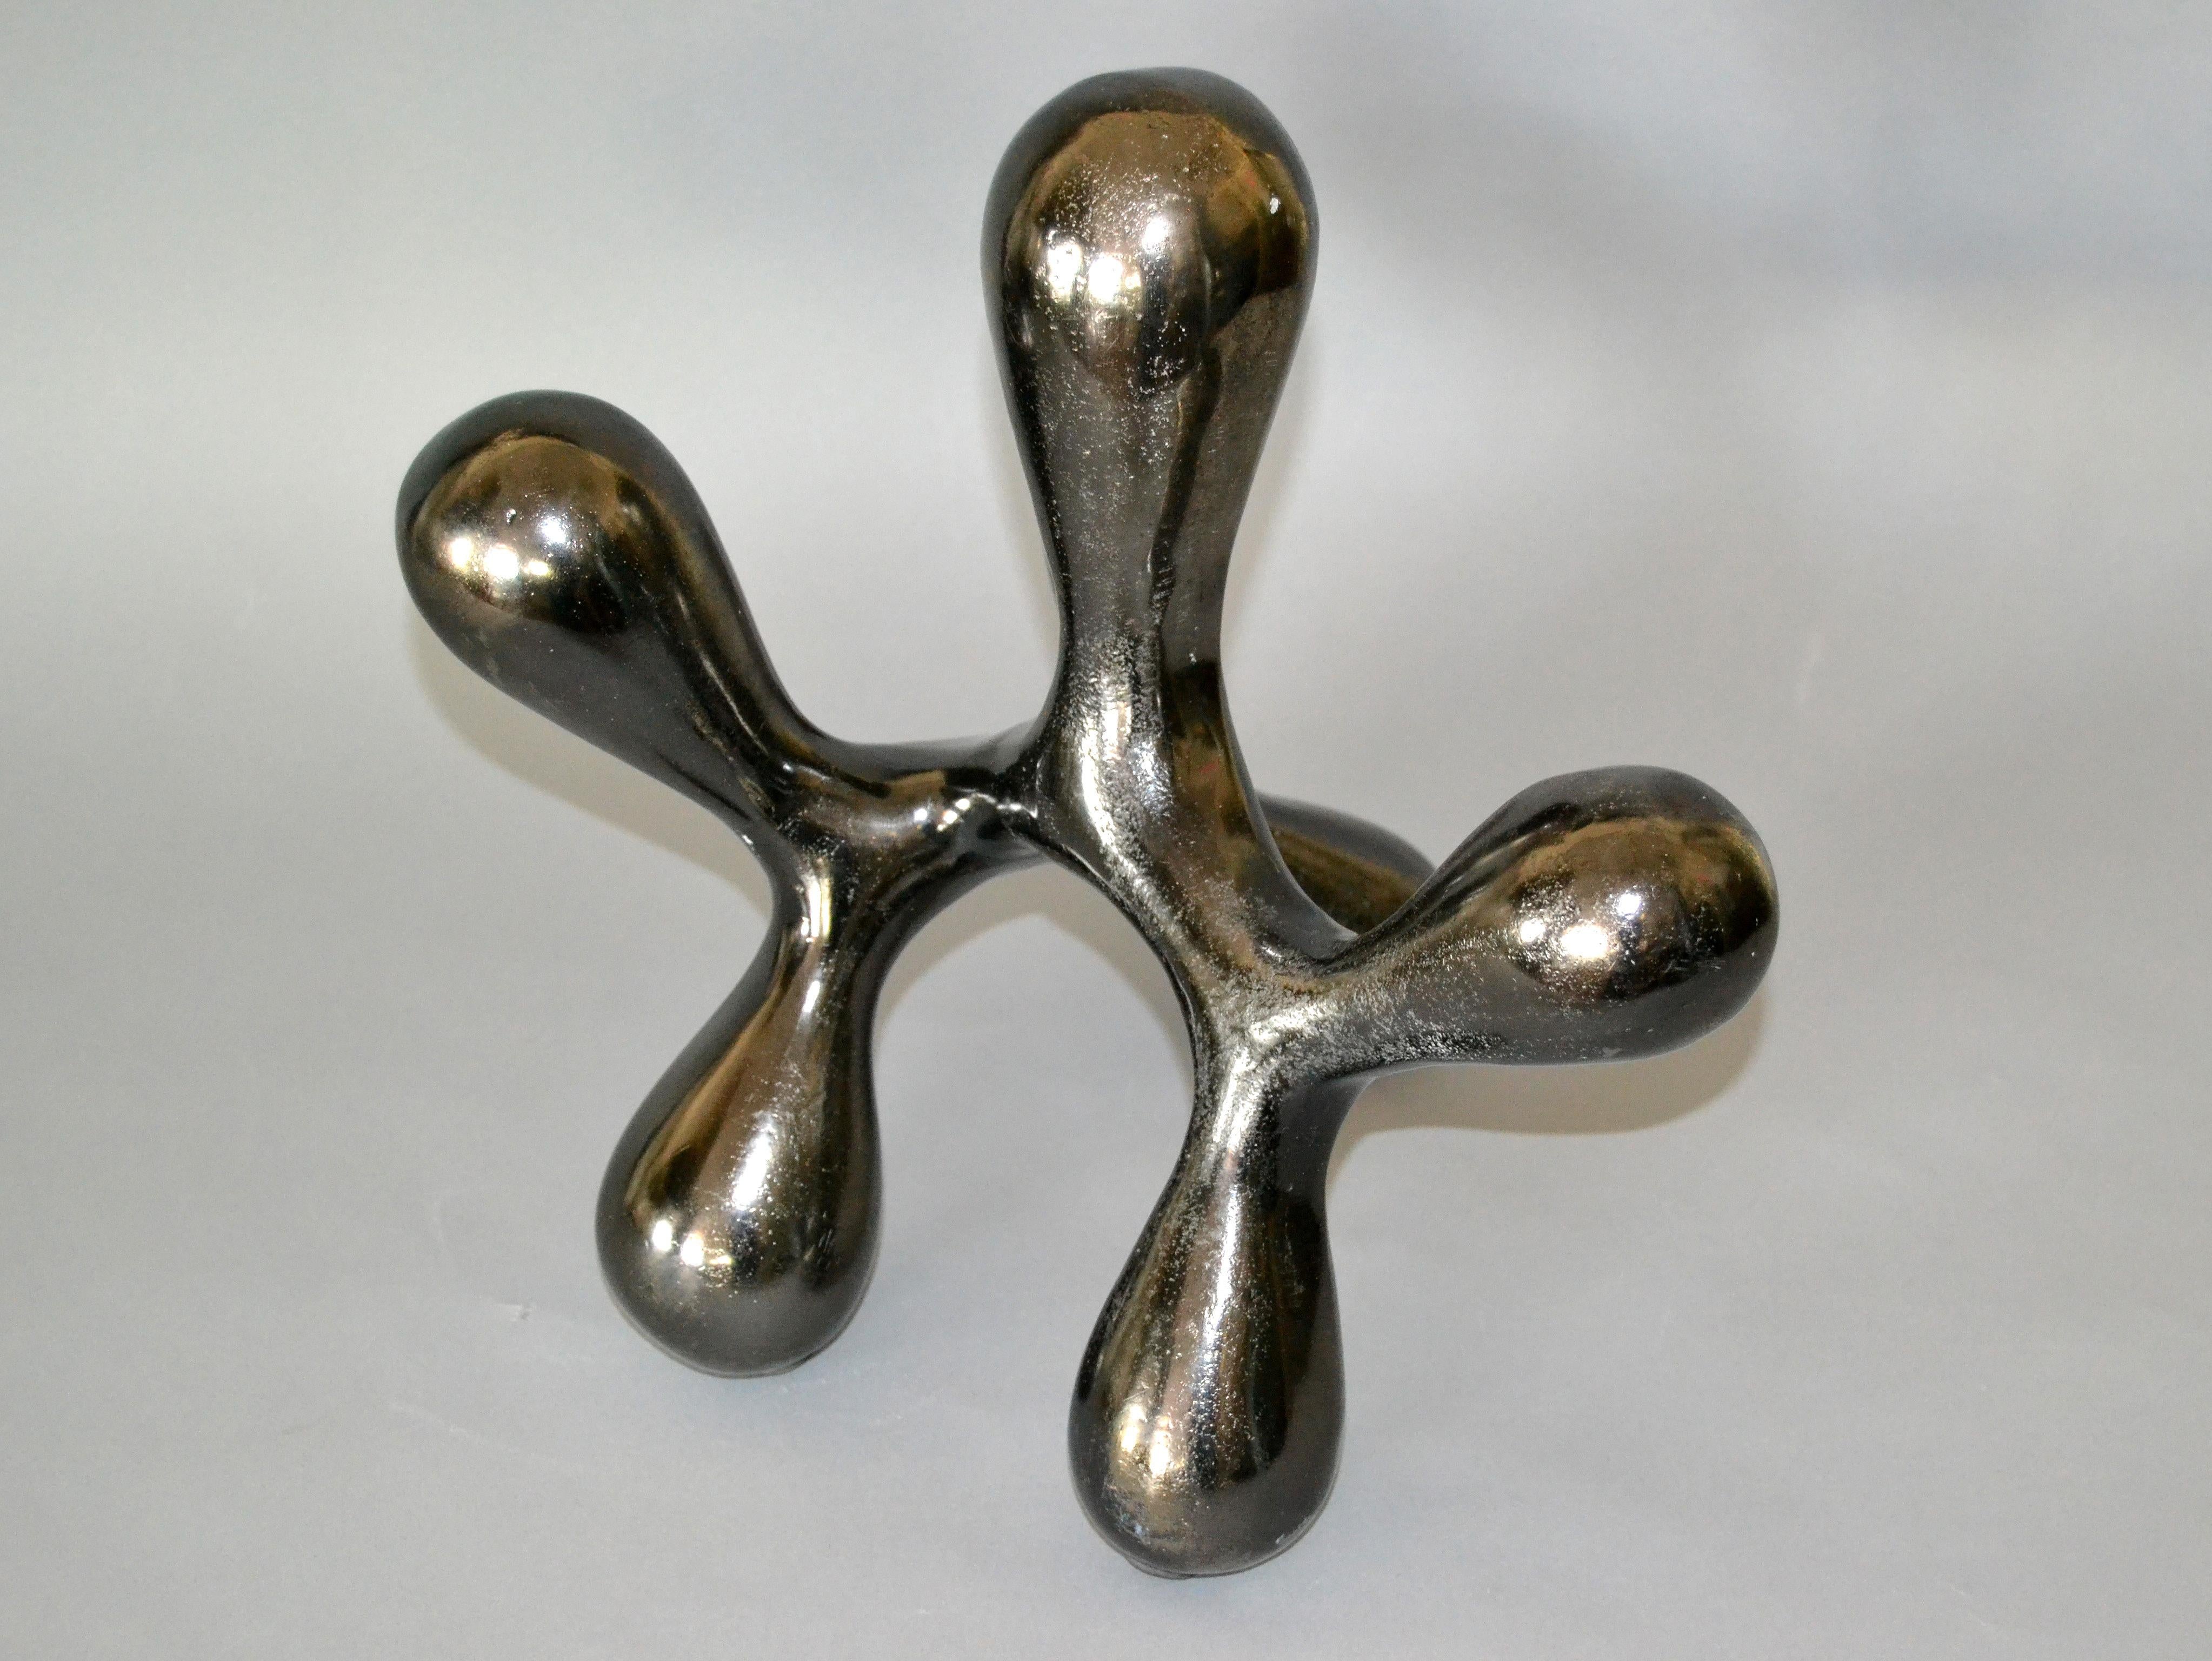 Mid-Century Modern biomorphic shape in abstract art bronze table sculpture.
No markings.
The biomorphic shape that seems to move as you change perspective.
Simply lovely.